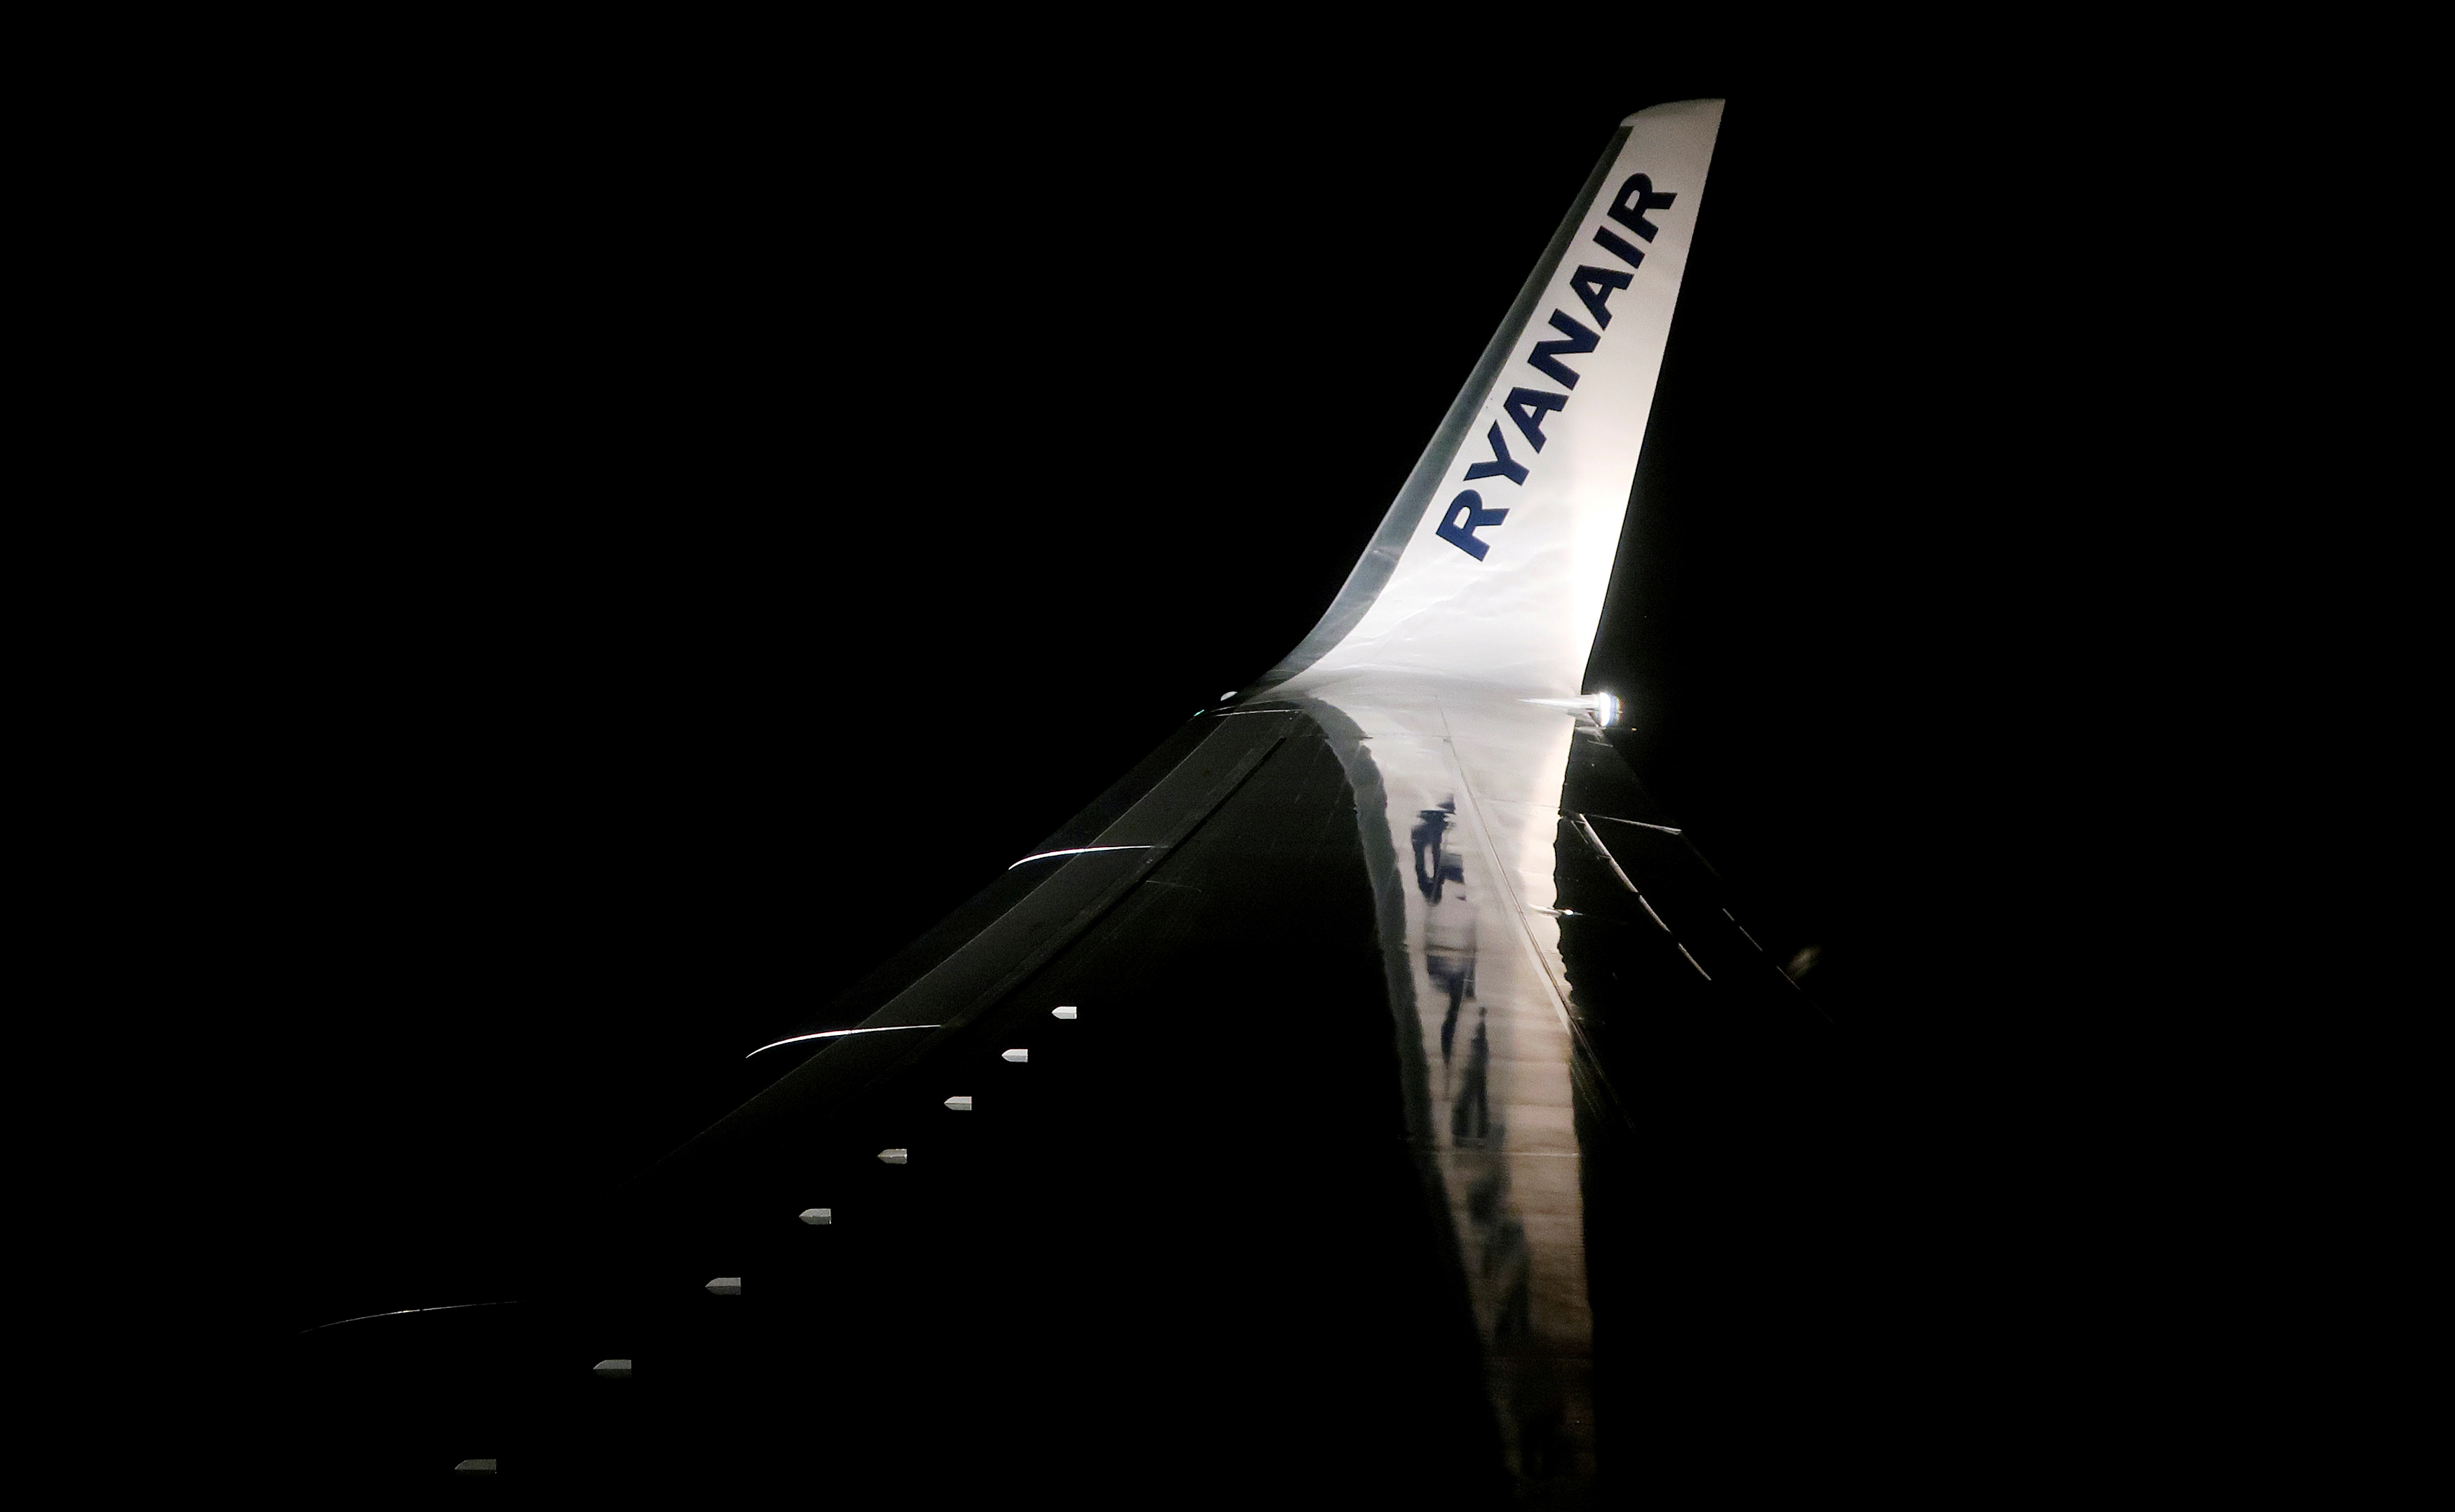 A Ryanair logo is seen on a wing of a passenger aircraft travelling from Madrid International Airport to Bergamo Airport, Italy